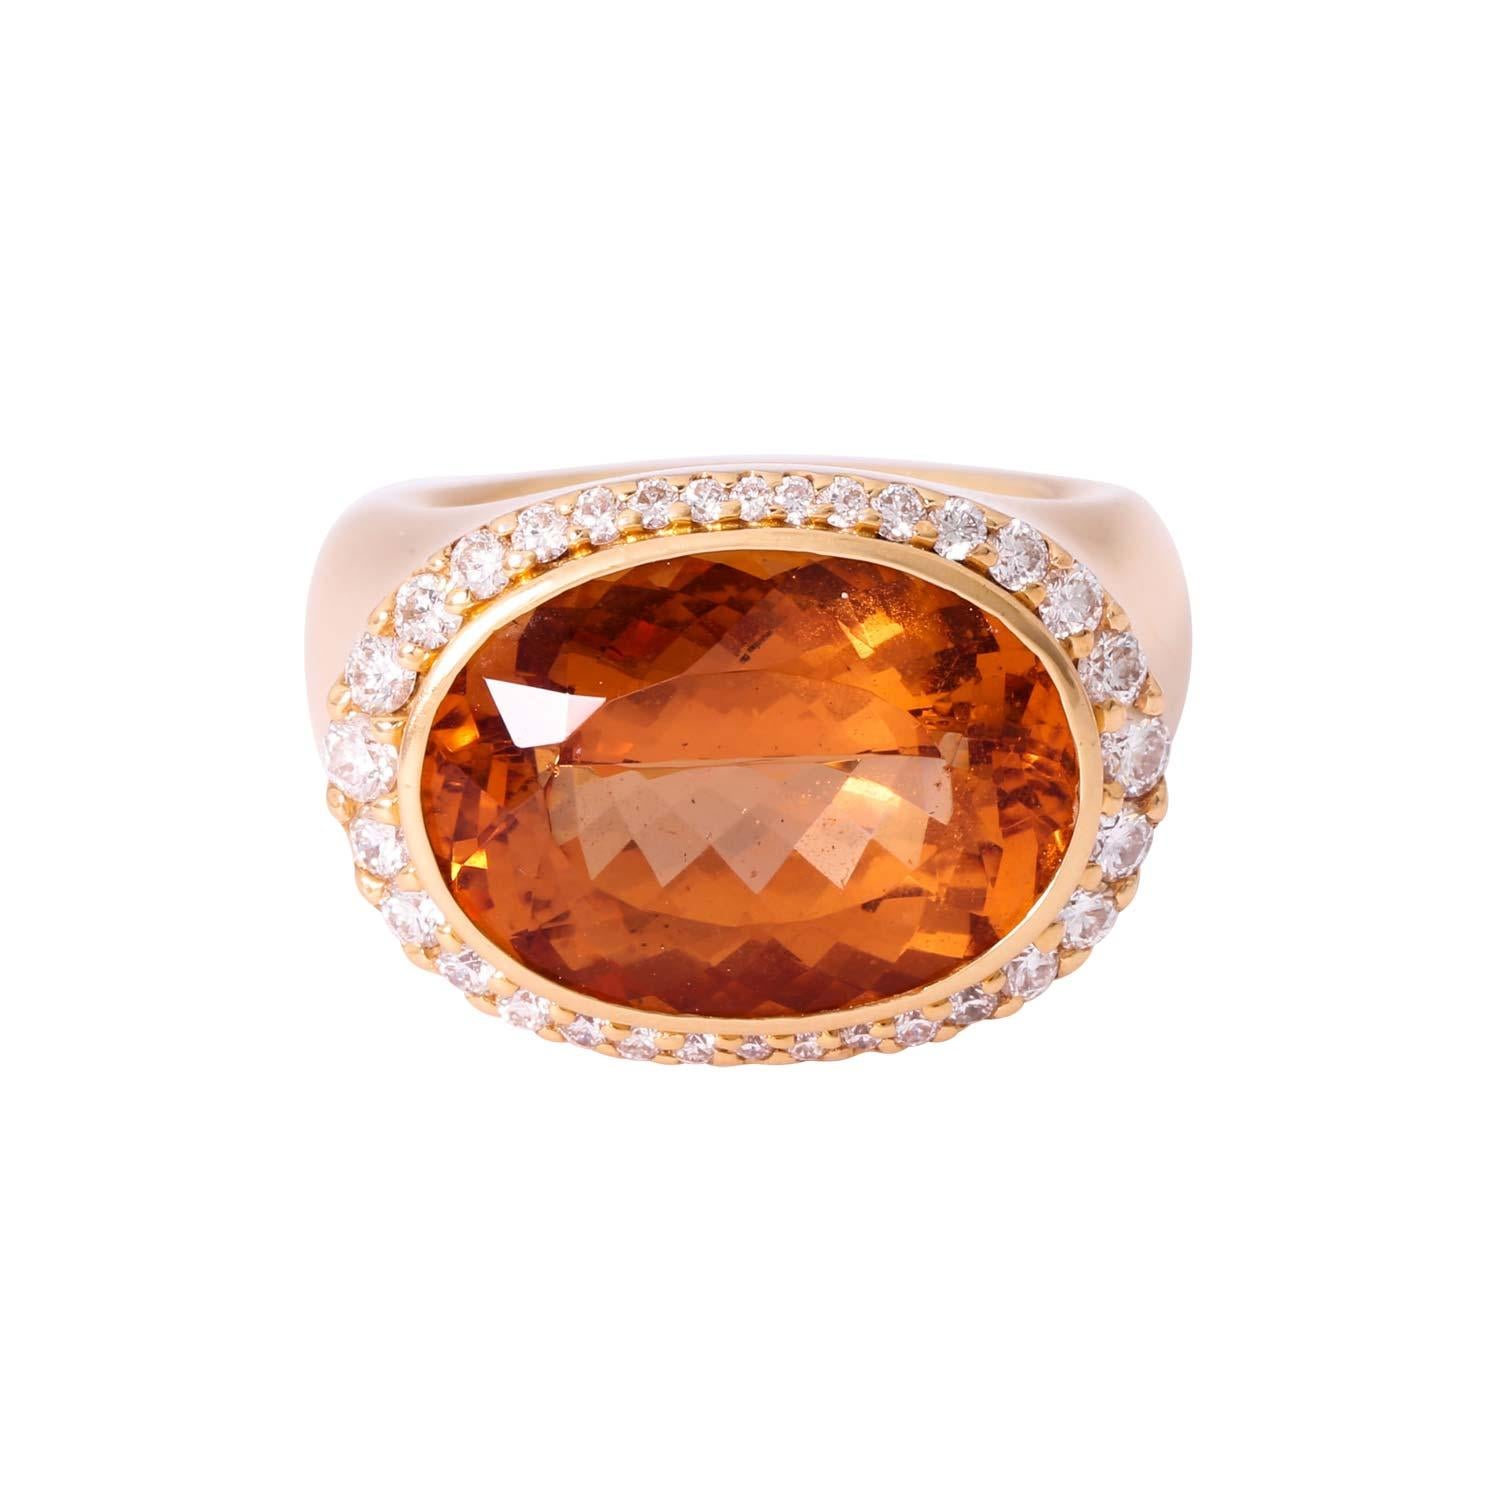 Surrounded by 32 brilliant-cut diamonds totaling approx. 1.0 ct, good color and clarity, GG 18K, 34.6g, RW: 55, 21st century, slight signs of wear, stone slightly rubbed, high-quality goldsmith's work.

 WEMPE ring with with fine imperial topaz